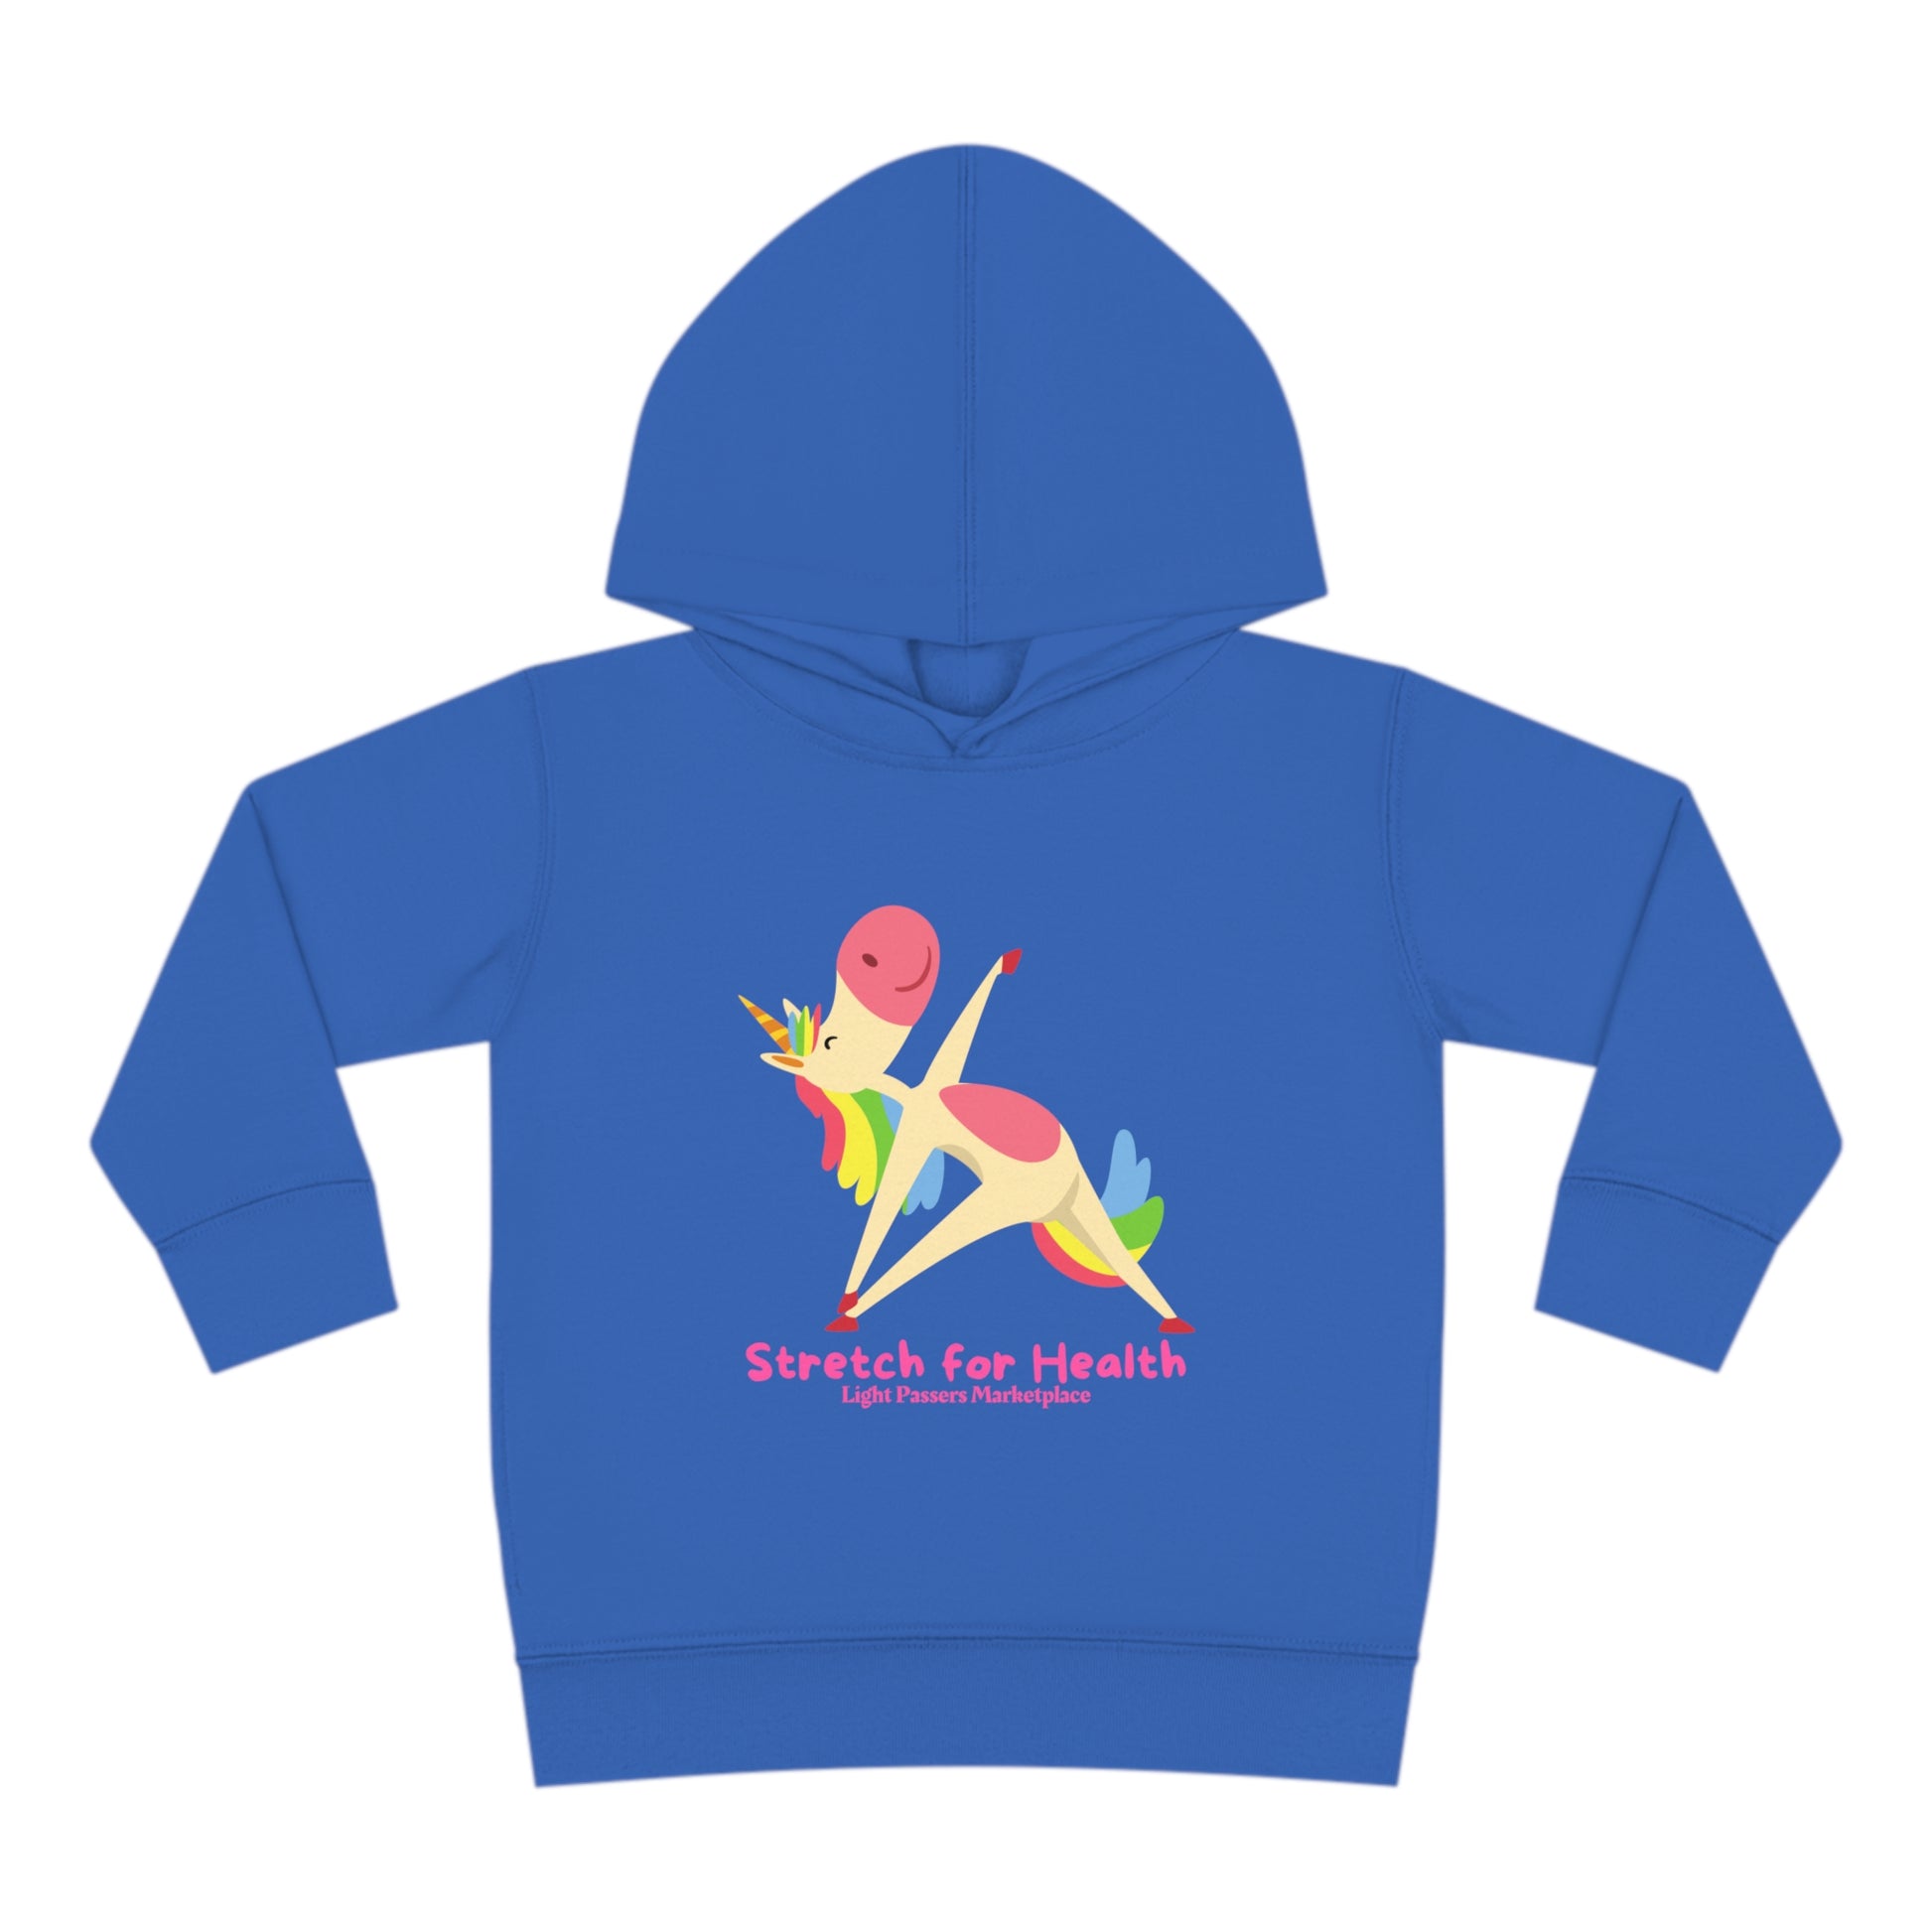 A Rabbit Skins toddler hoodie featuring a unicorn stretching cartoon on a blue background. Jersey-lined hood, double-needle stitching, side seam pockets for cozy durability.